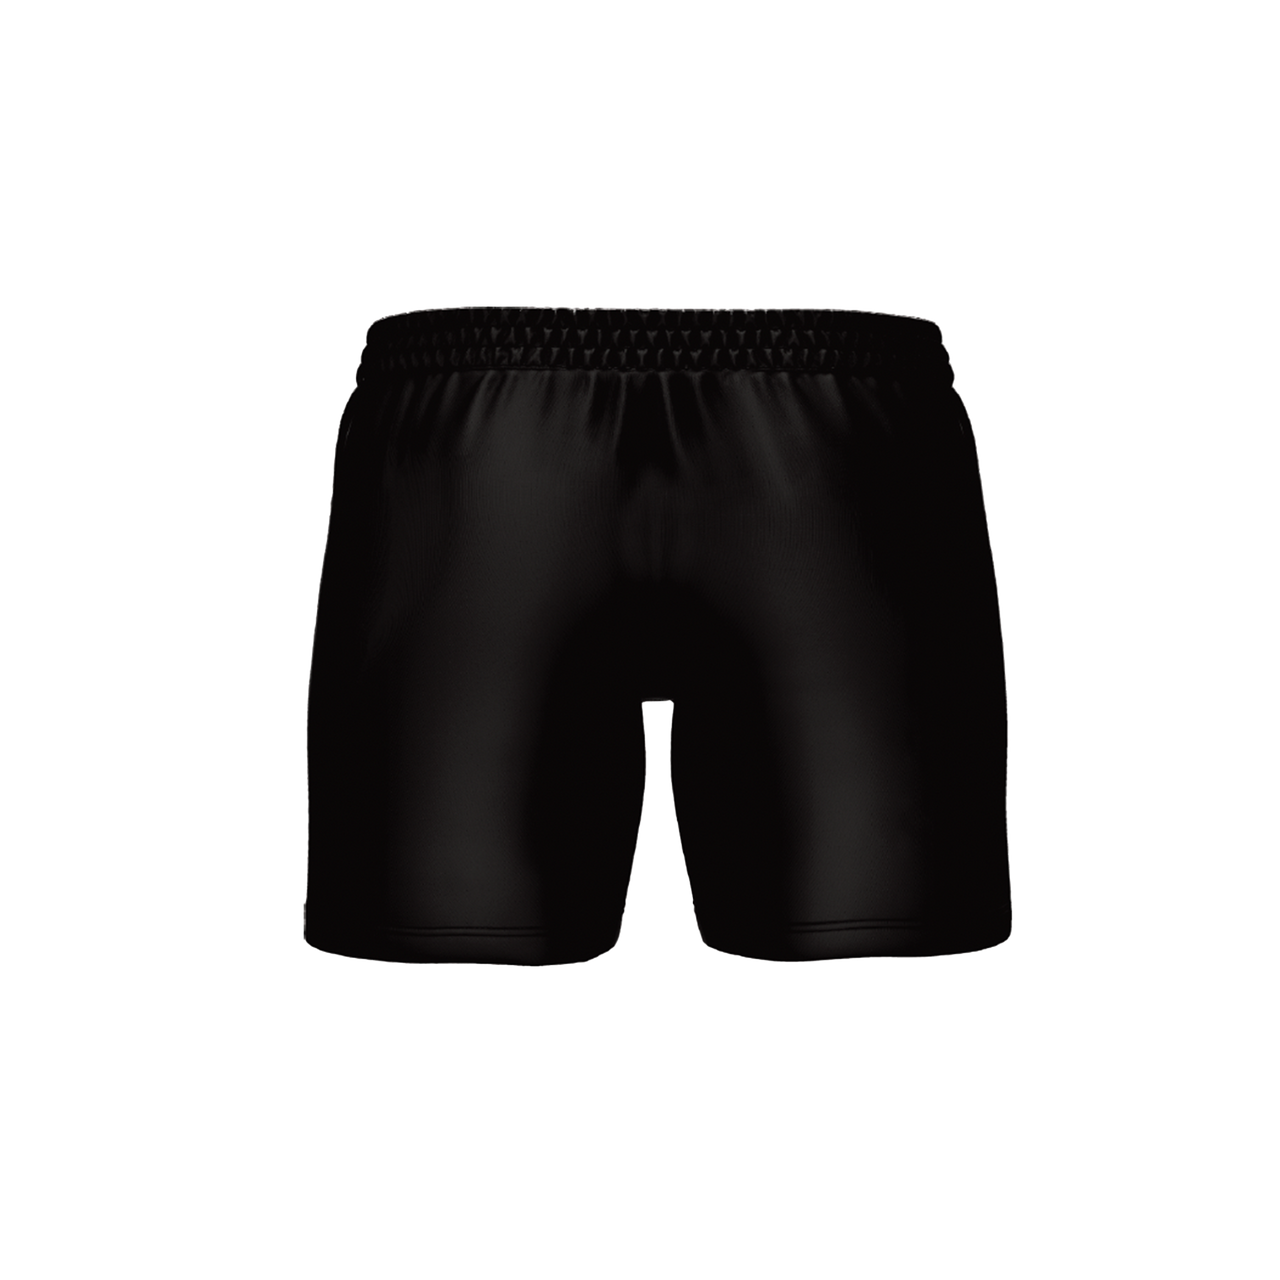 Denver Water Dogs Rugby Gym Shorts